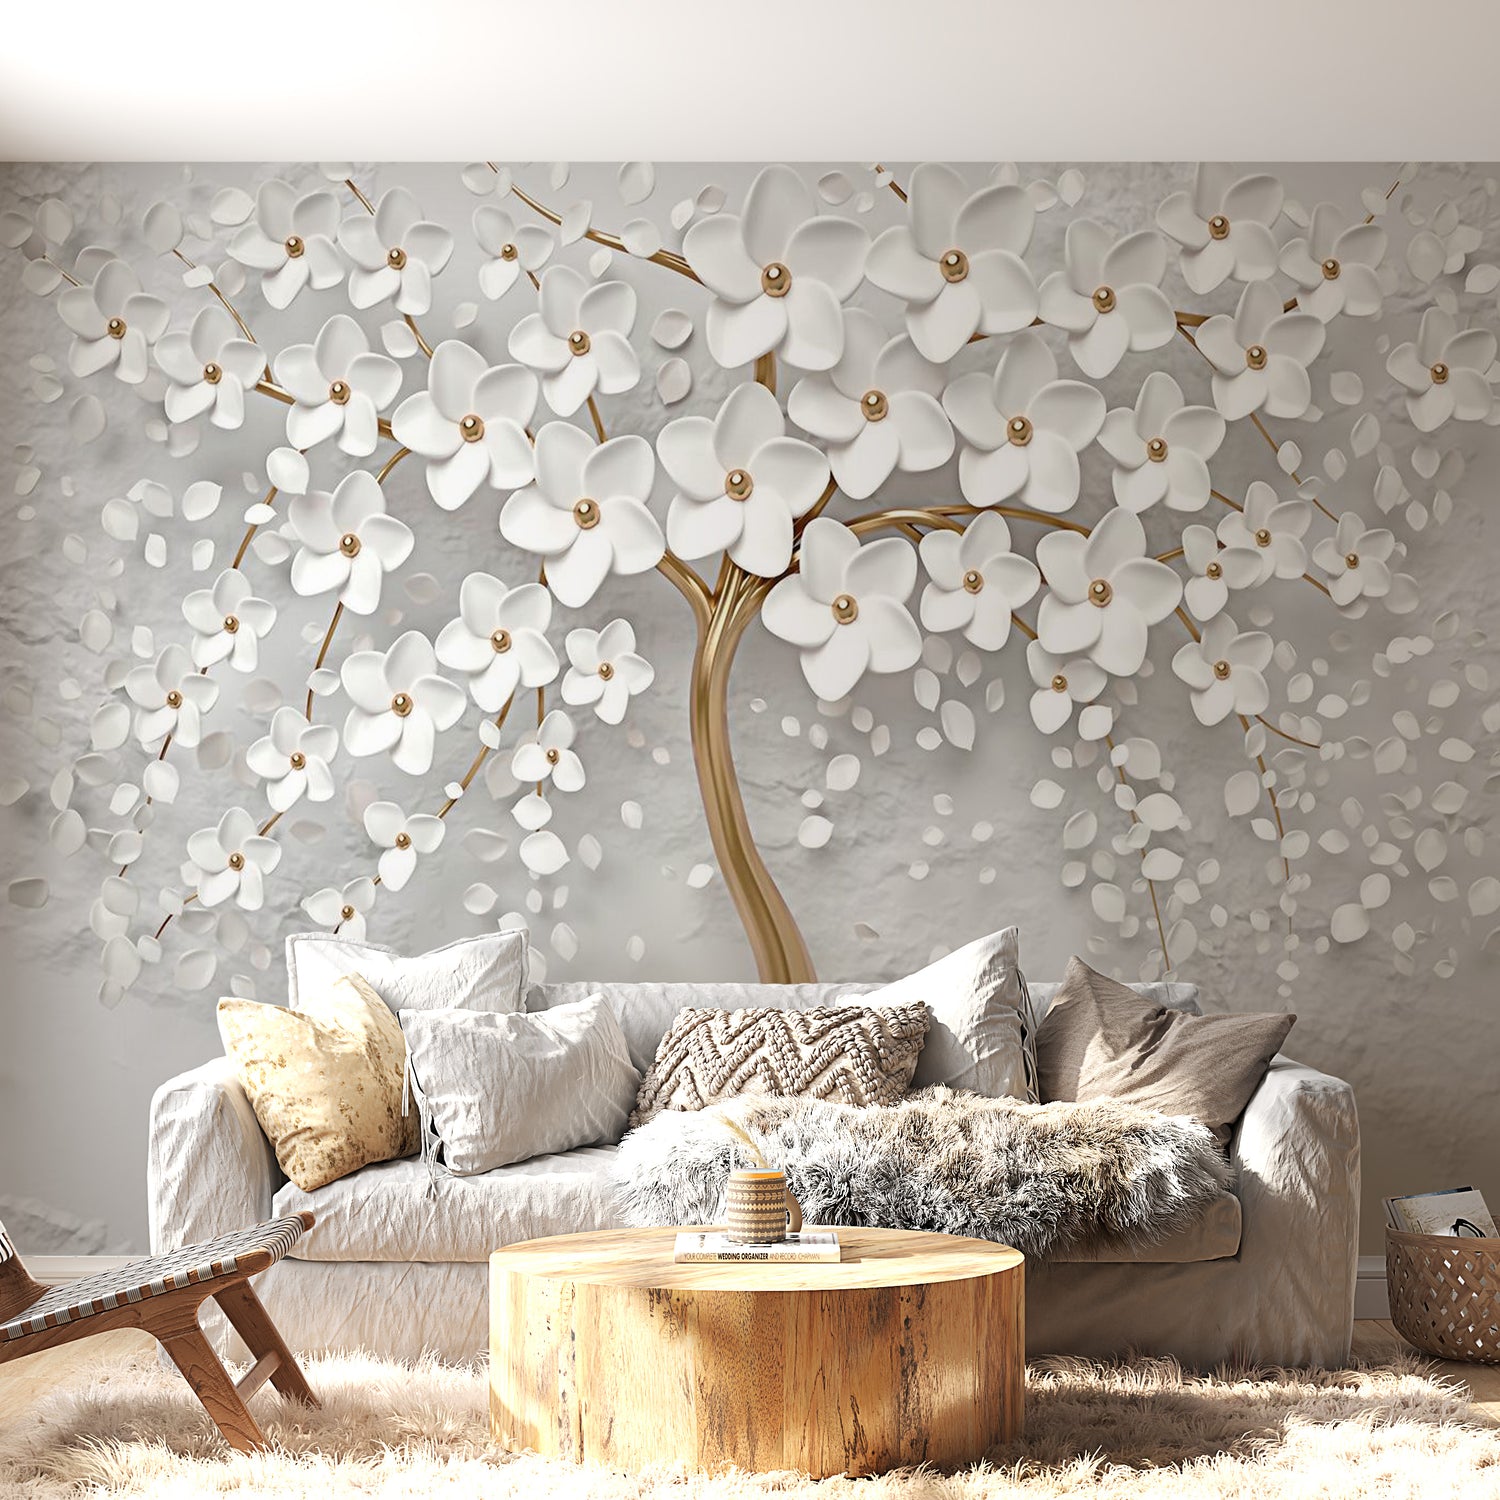 Peel & Stick Floral Wall Mural - Magic Magnolia - Removable Wall Decals